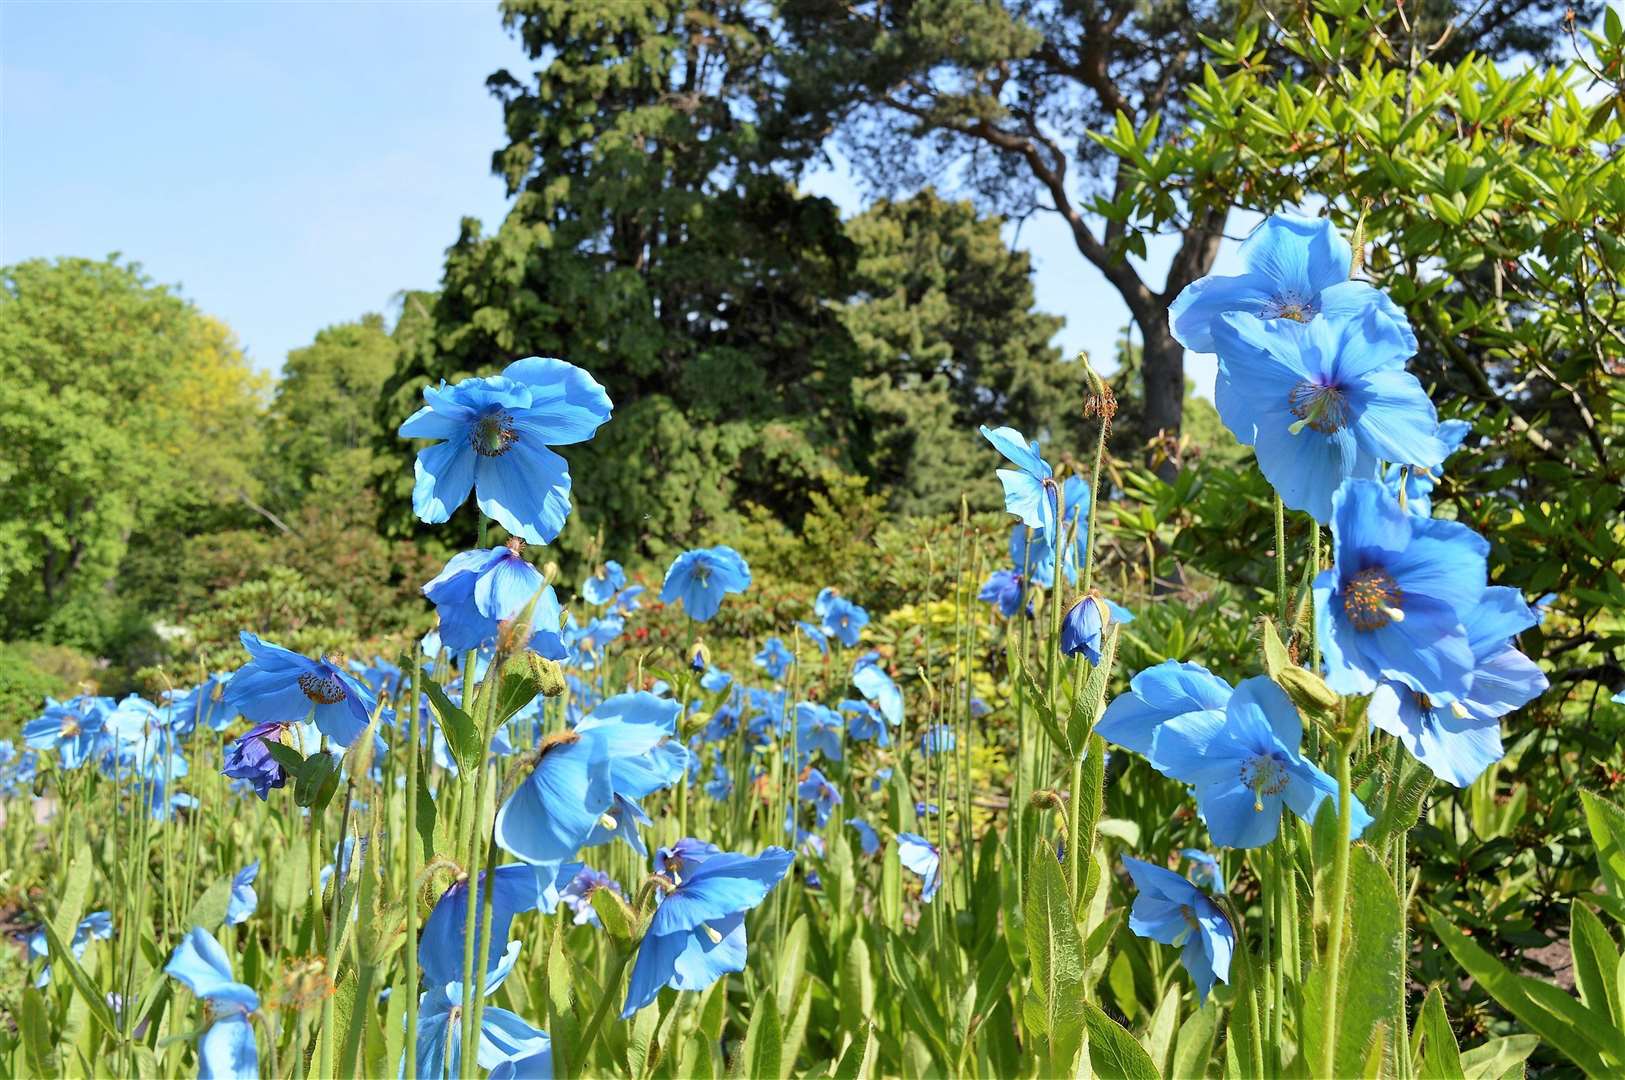 For soaking up water in damp ground, the Himalayan blue poppy. is ideal. This is Meconopsis ‘Slieve Donard’. Scottish Water is providing tips to help the public tackle climate change in their gardens - not matter how large or small.